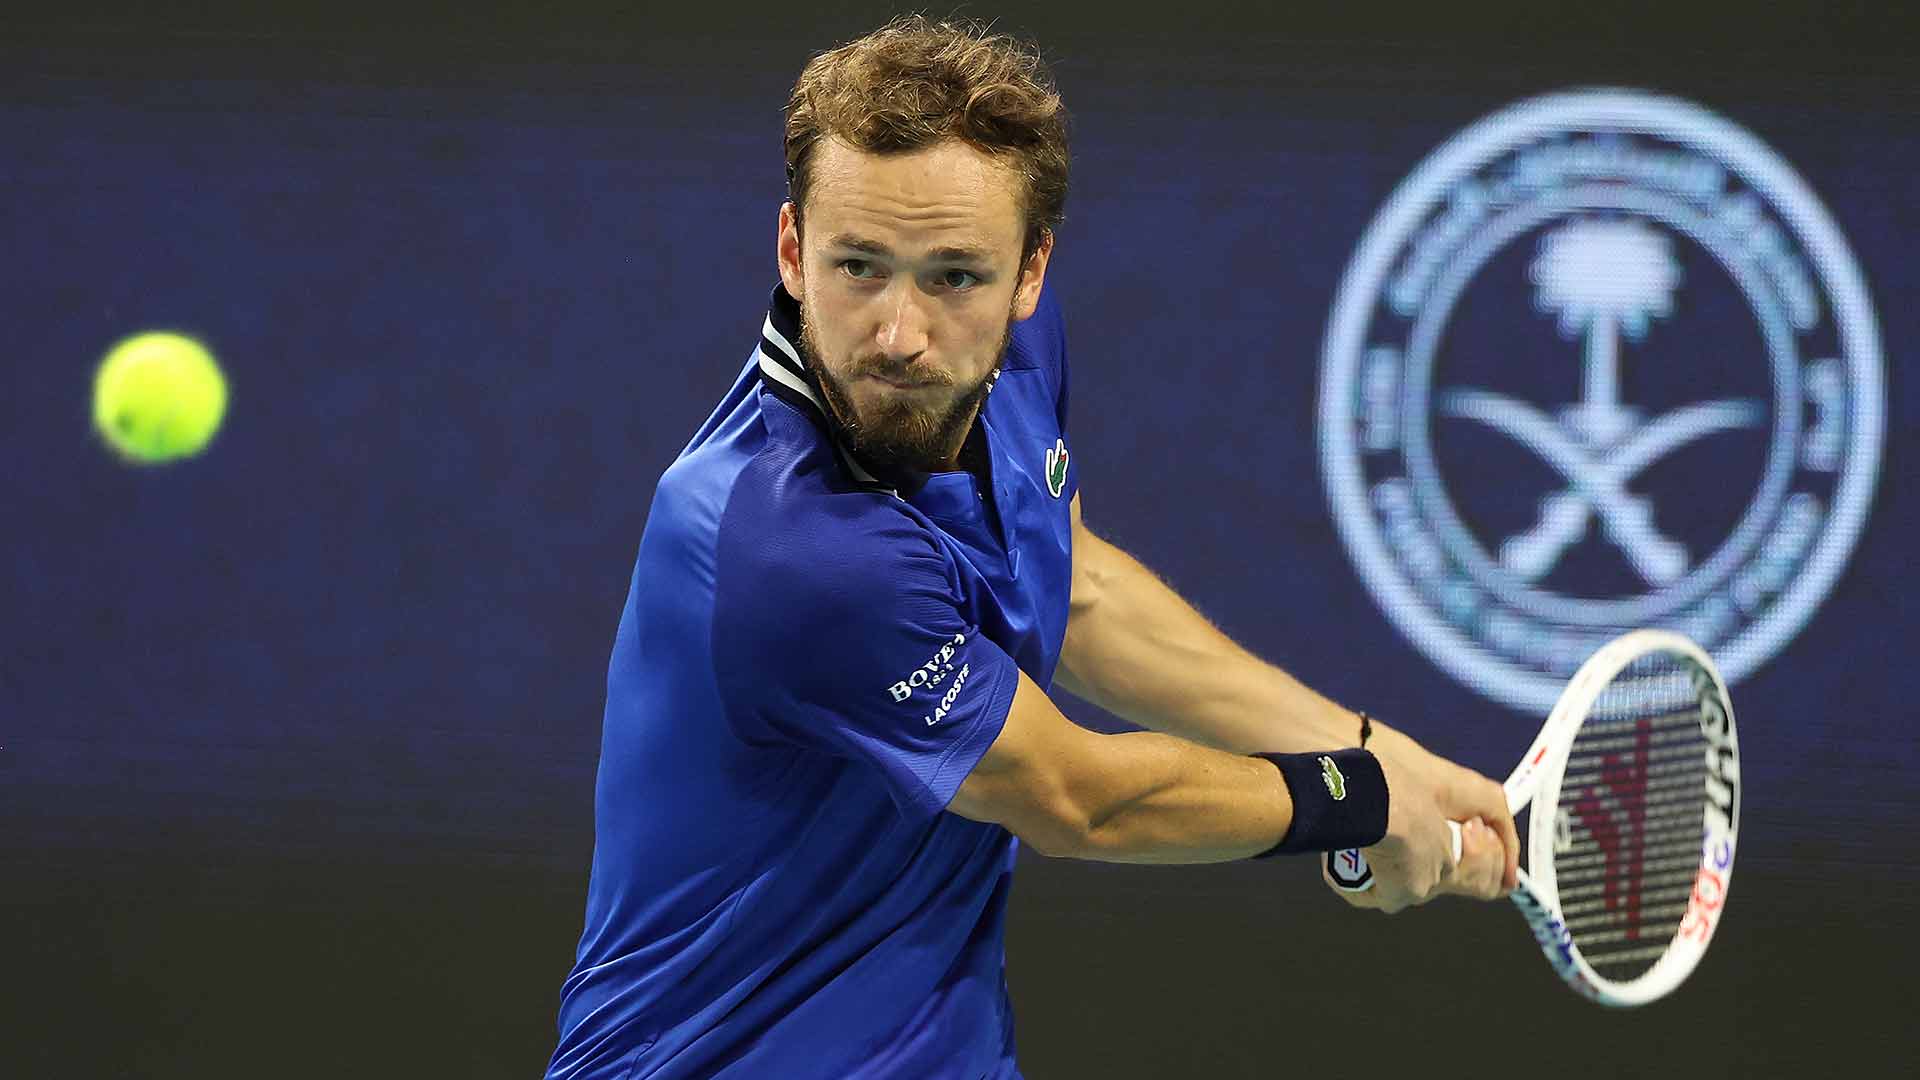 Daniil Medvedev improves to 18-3 on the season and moves to within two wins of successfully defending a title for the first time in his career.